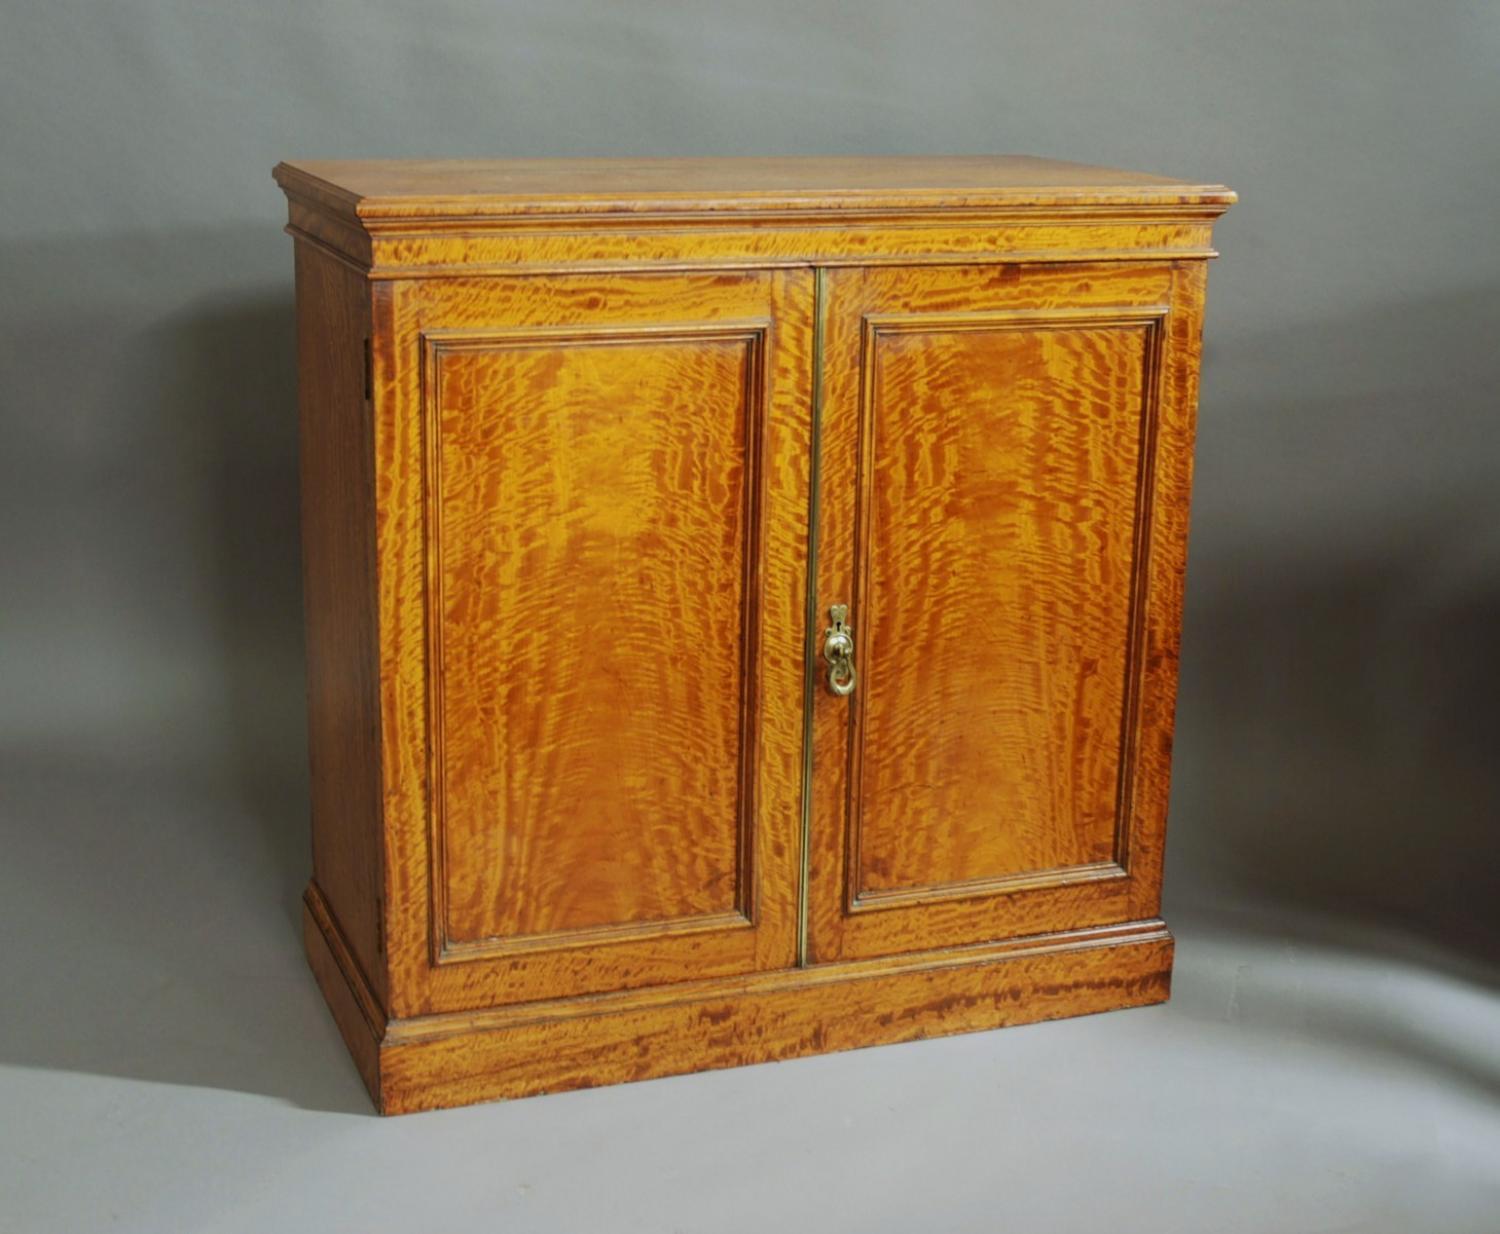 Superb quality late 19thc satinwood cabinet